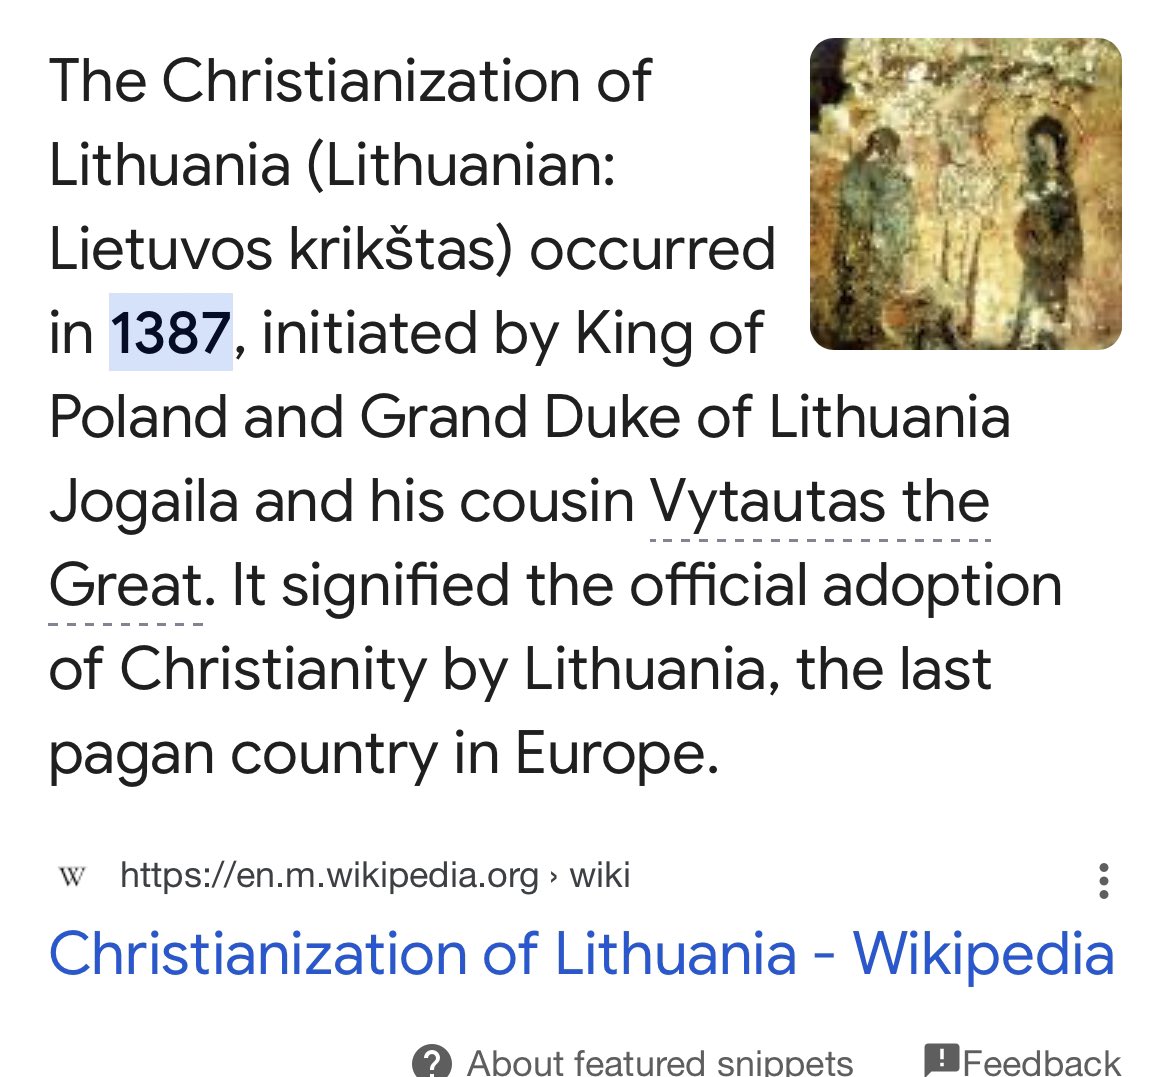 Obviously not all pagans are autists, so this tweet is silly, but I feel the deep need to nitpick one thing about this—a lot of countries in Europe didn’t convert to Christianity until way after Rome.